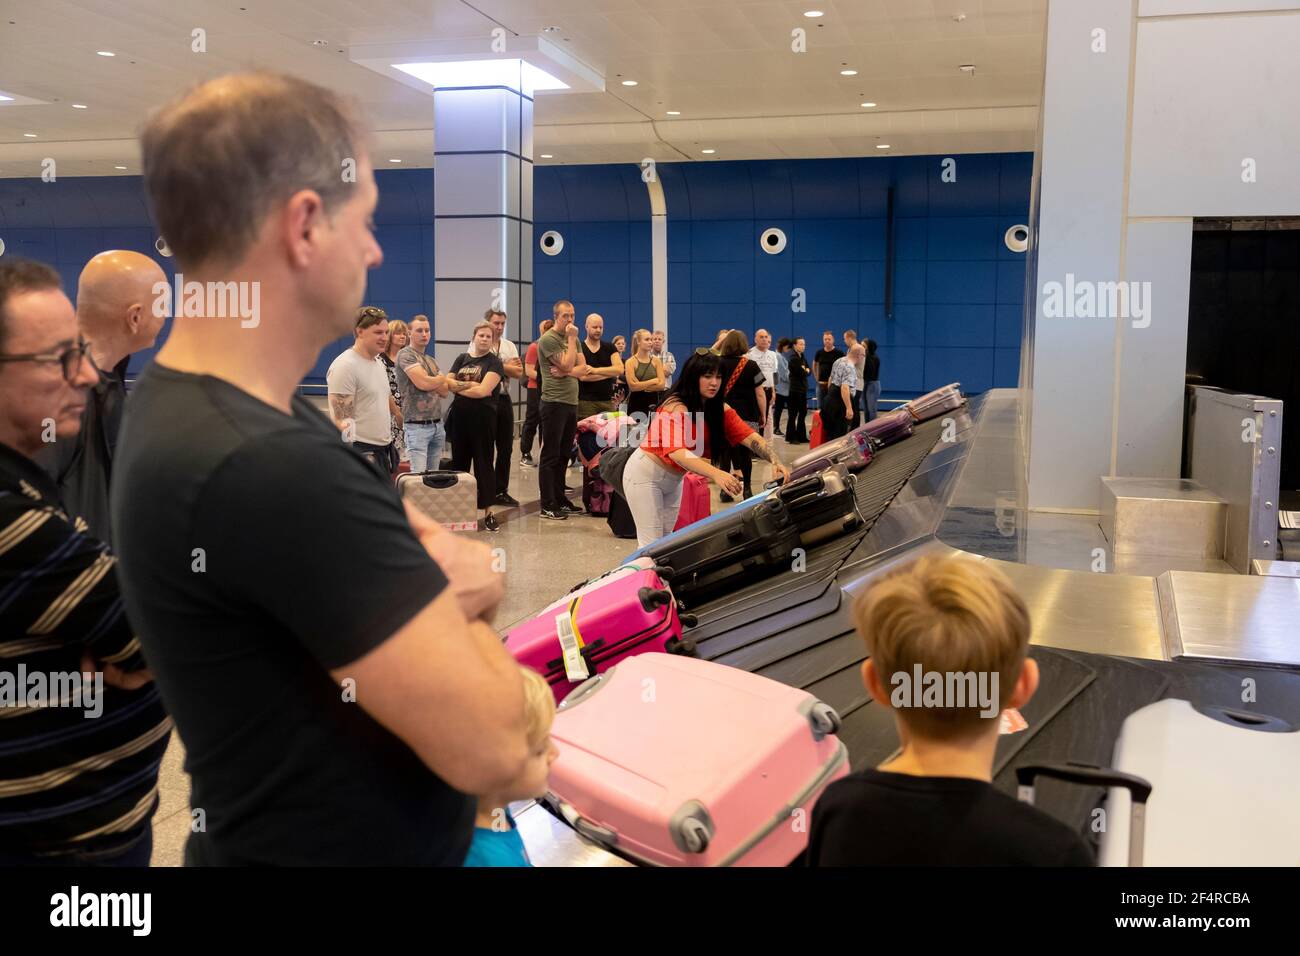 People are waiting for their luggage after landing. Stock Photo